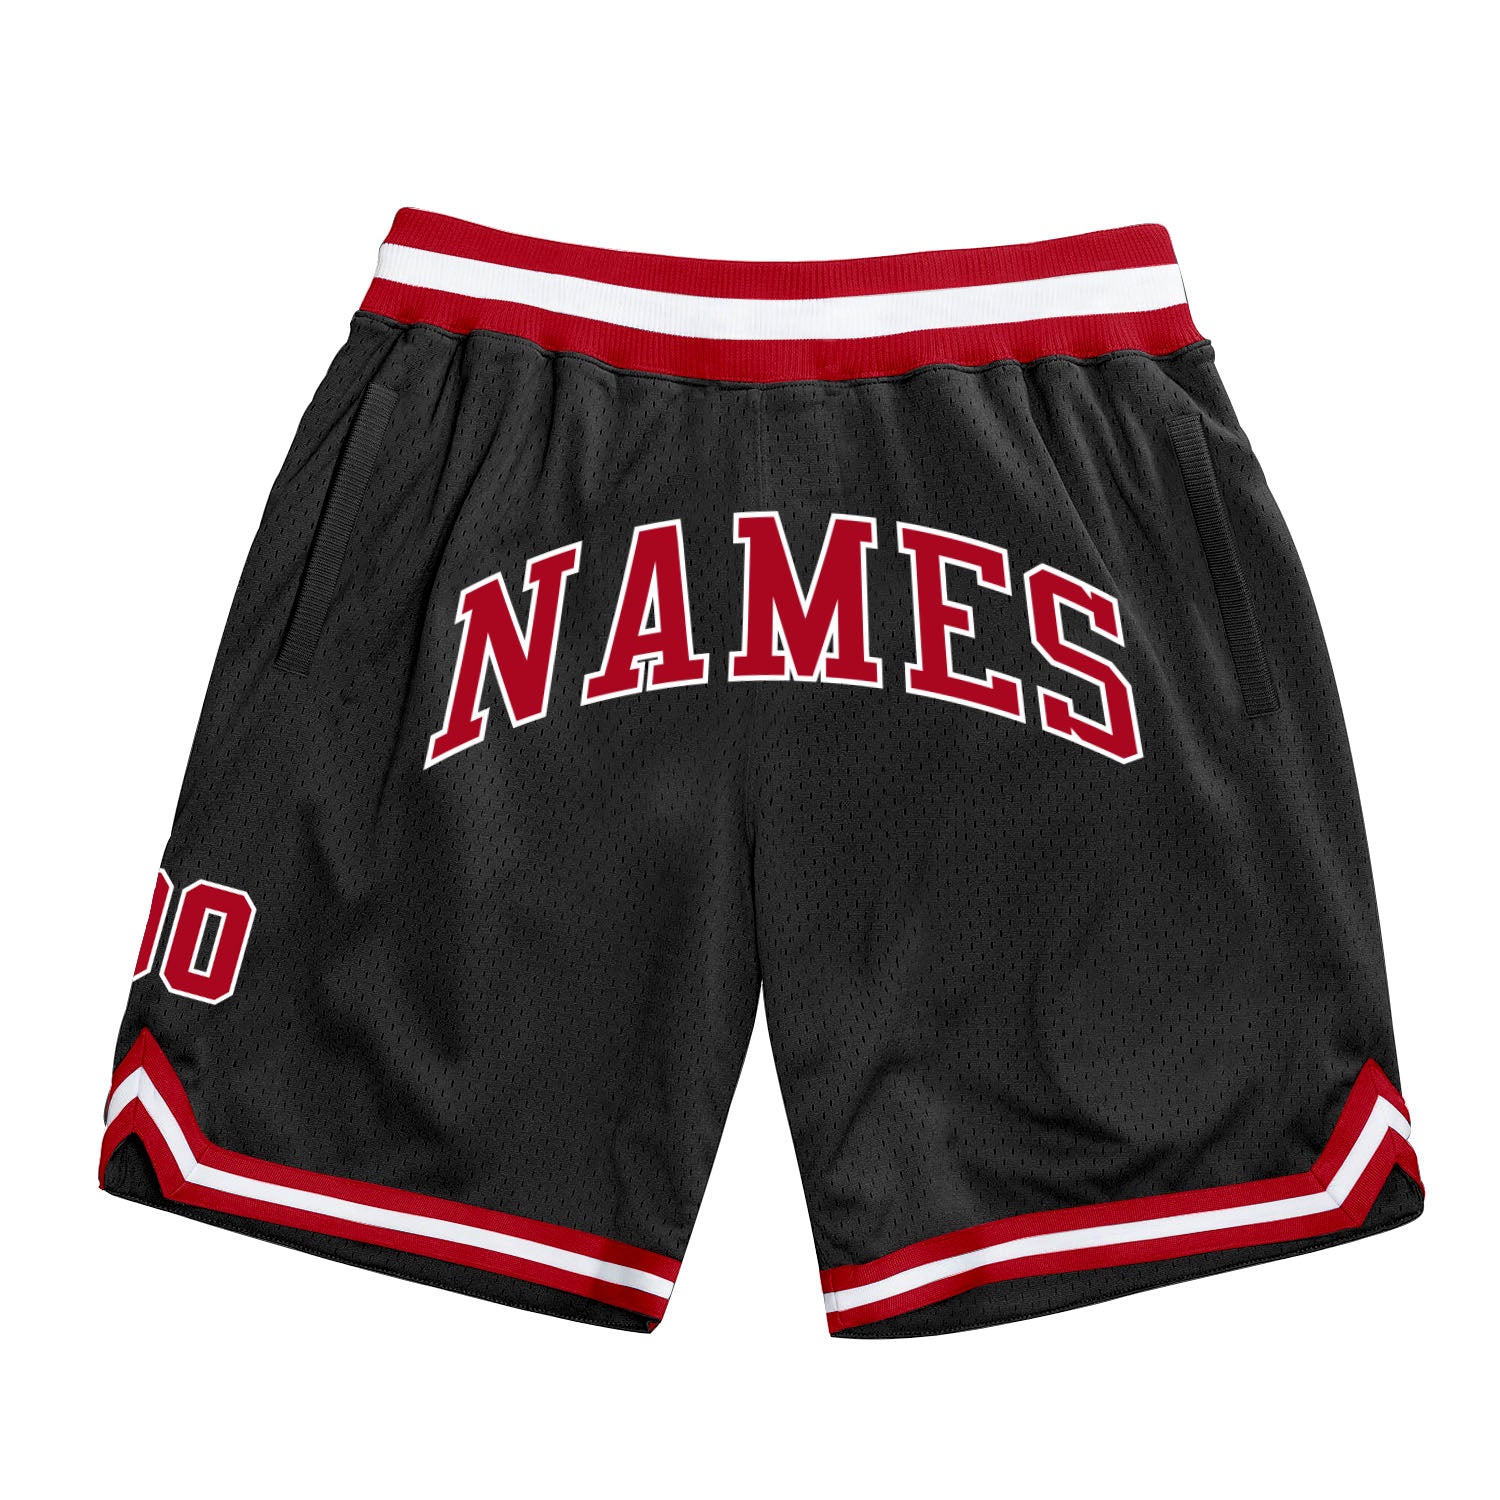 Custom Black Red Pinstripe White Gray-Red Authentic Basketball